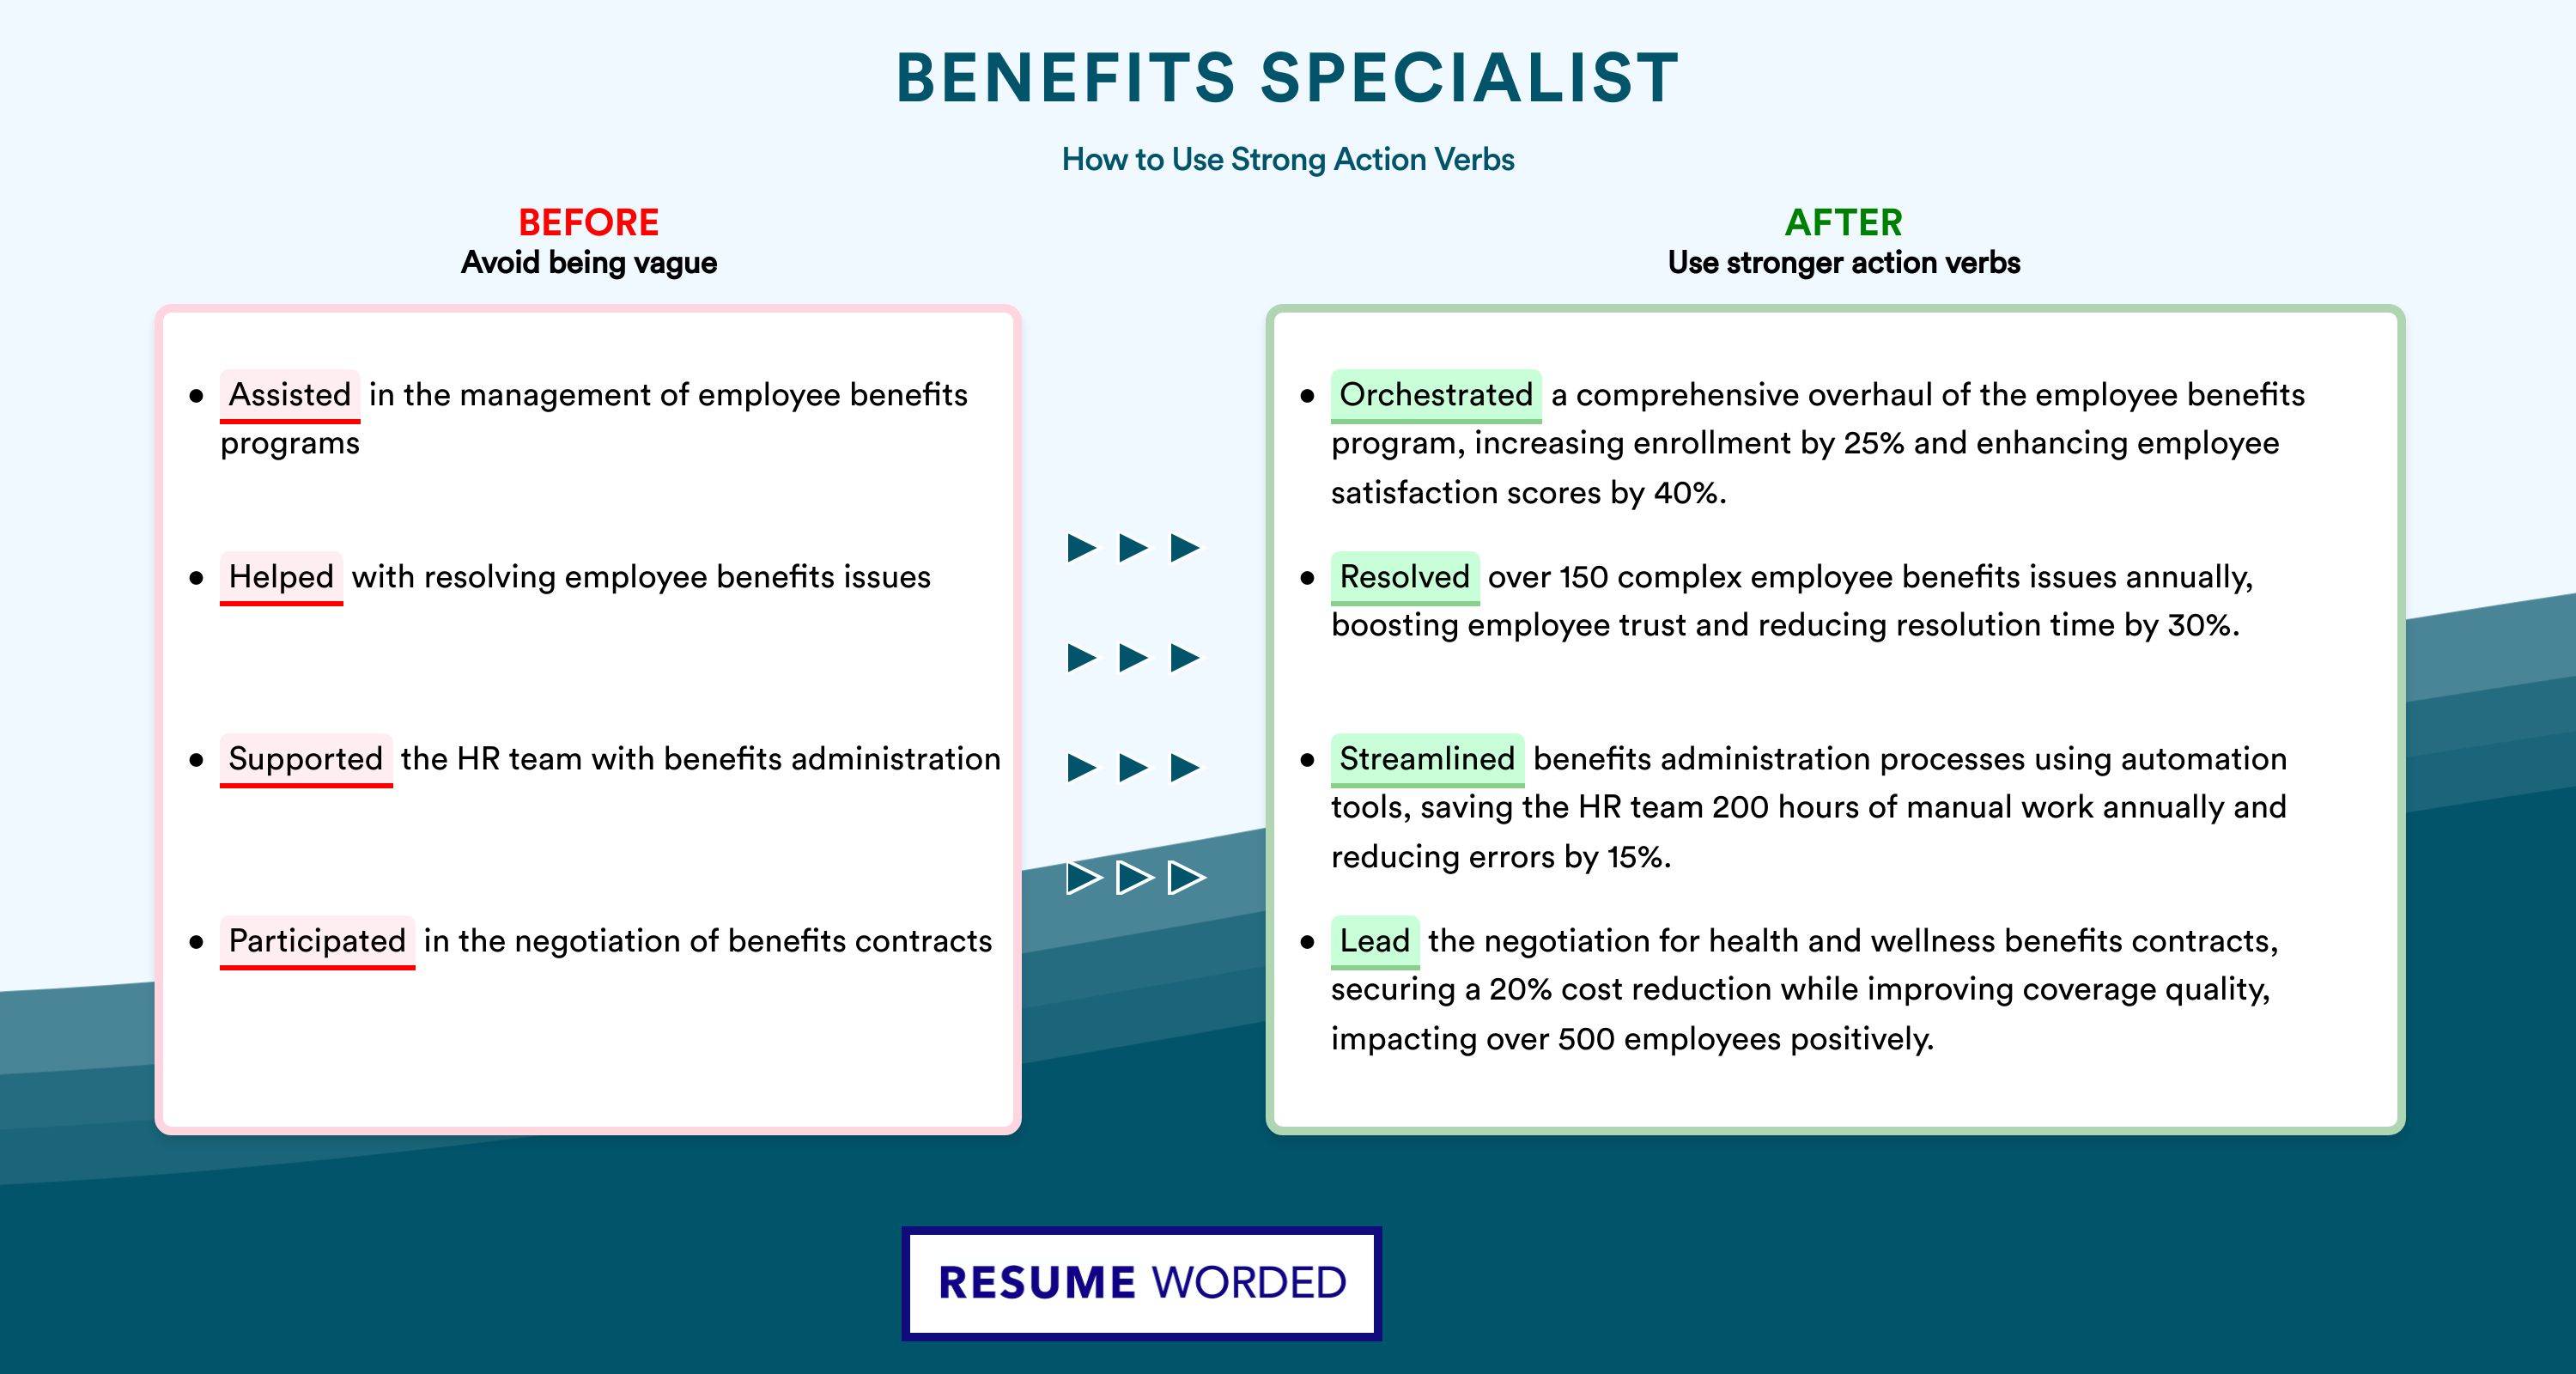 Action Verbs for Benefits Specialist